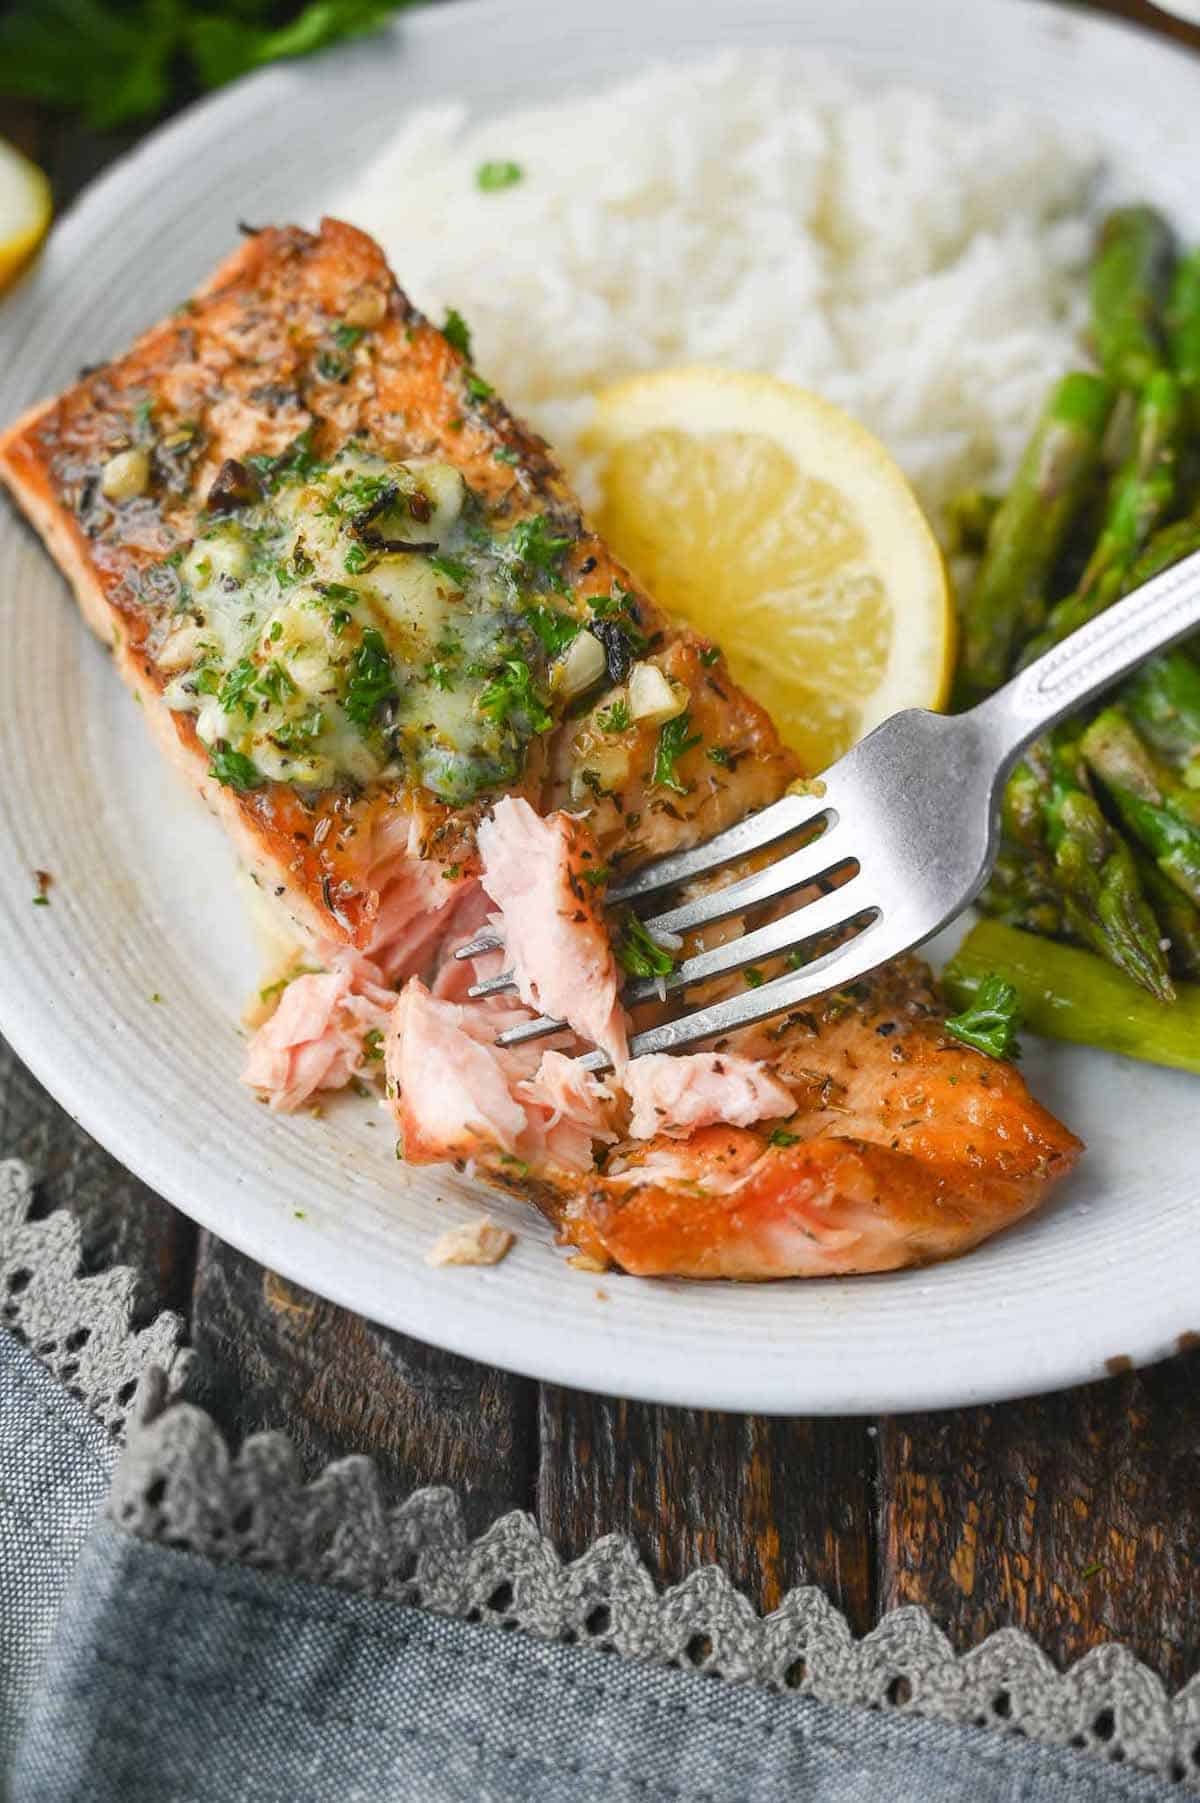 Salmon filet placed on a plate with rice and asparagus.